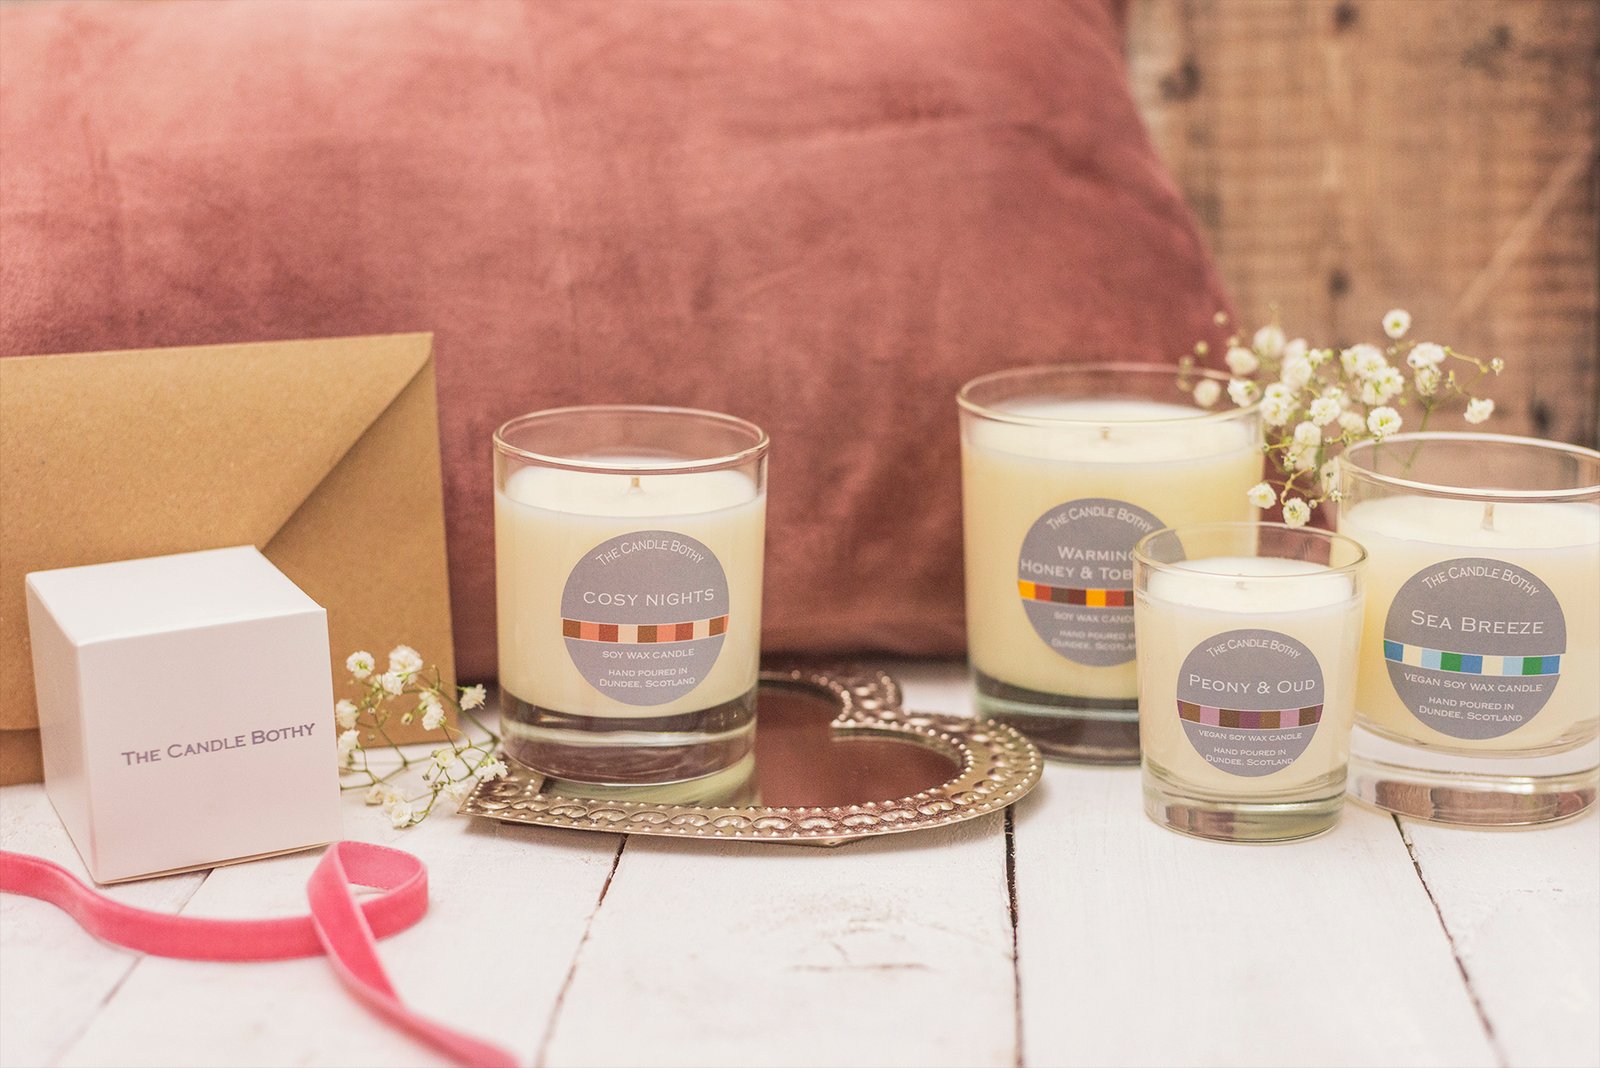 The Candle Bothy candle selection from £6.70